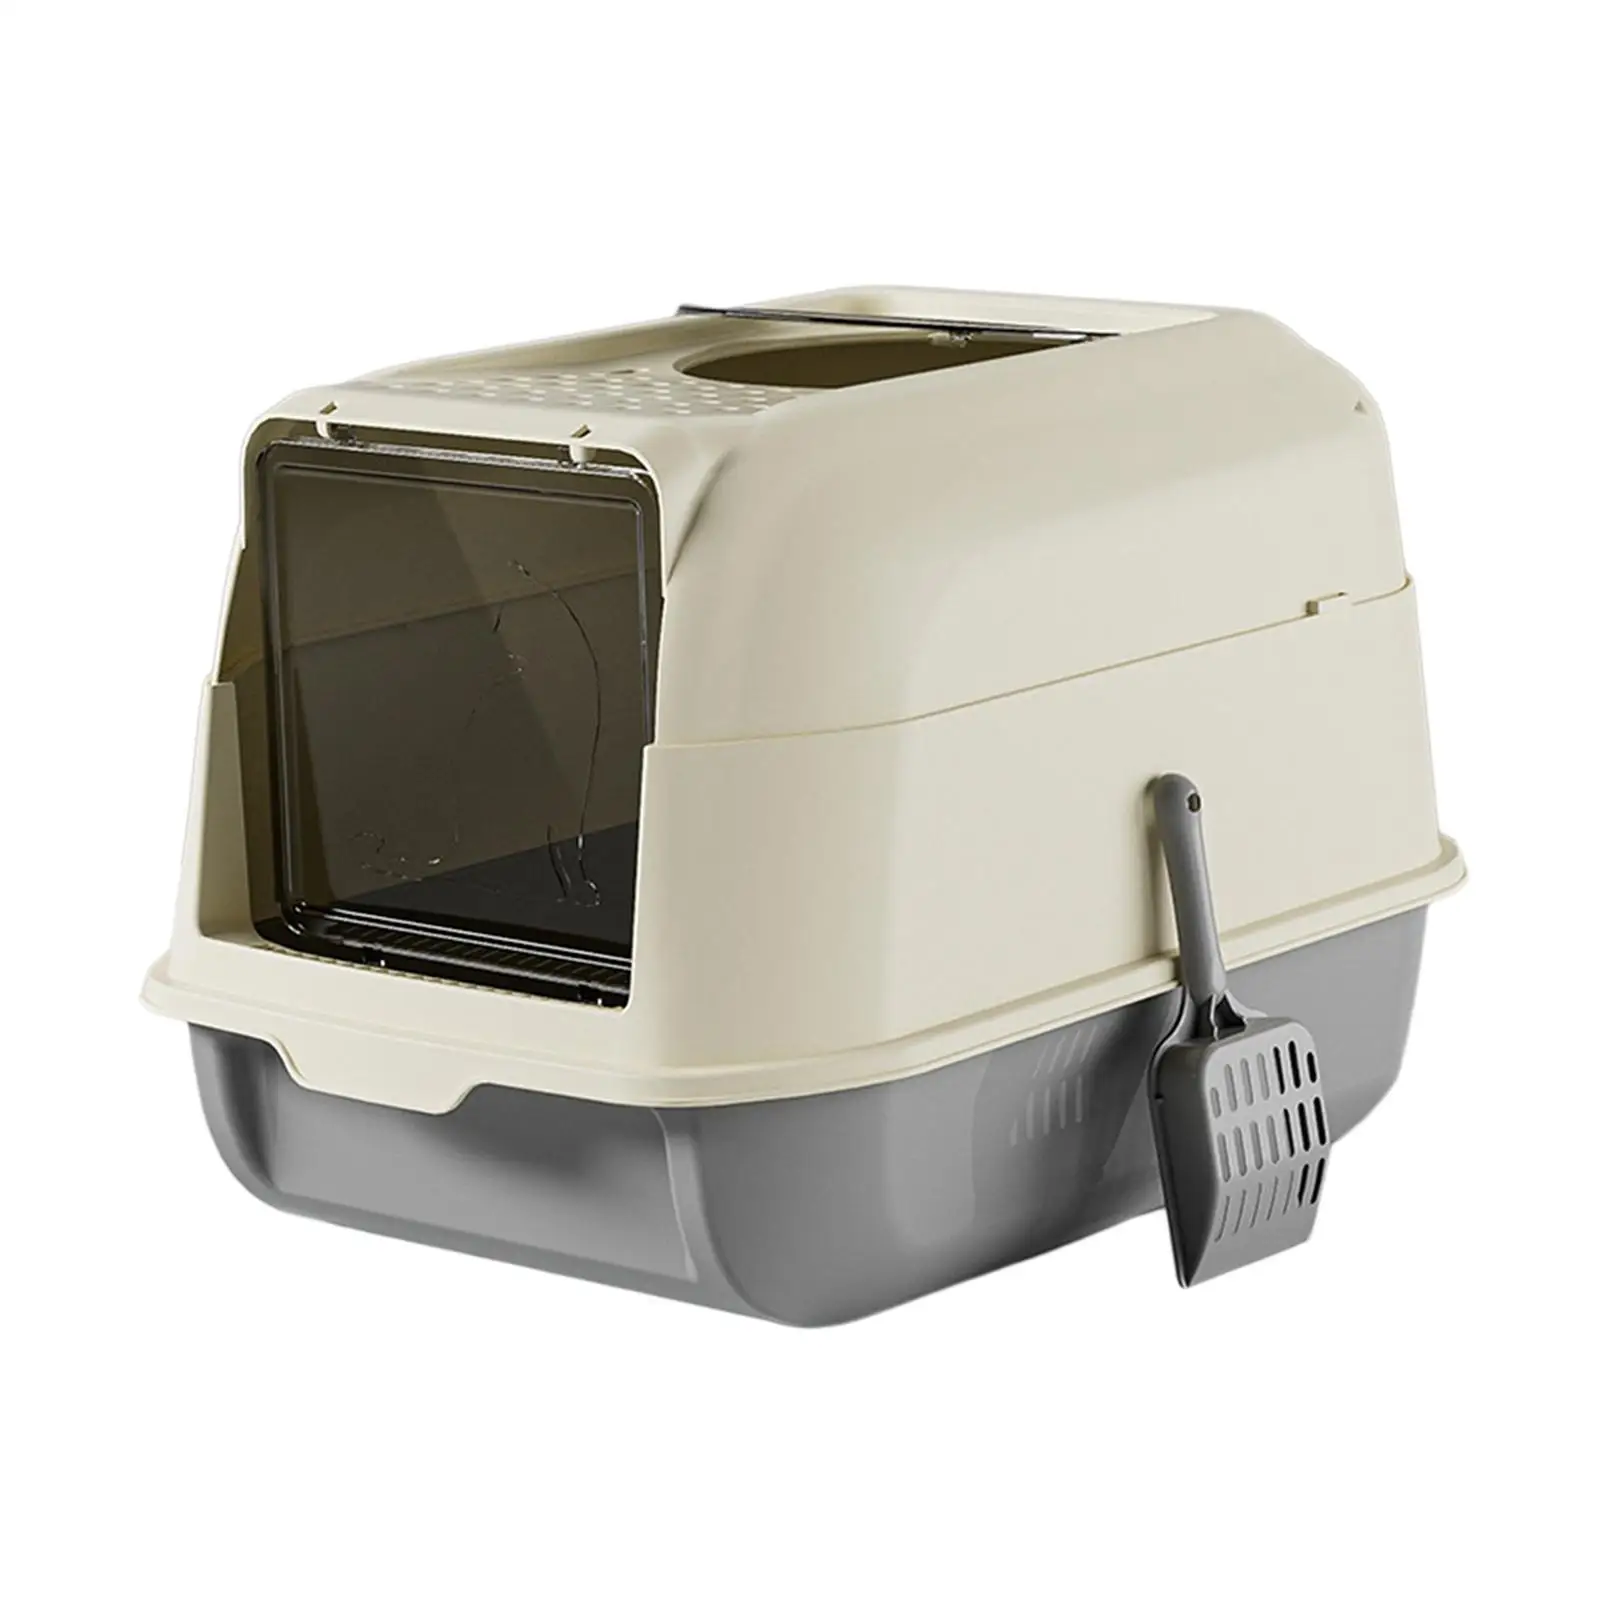 Cat litter box with lid, cat litter box with litter box, easy to clean with